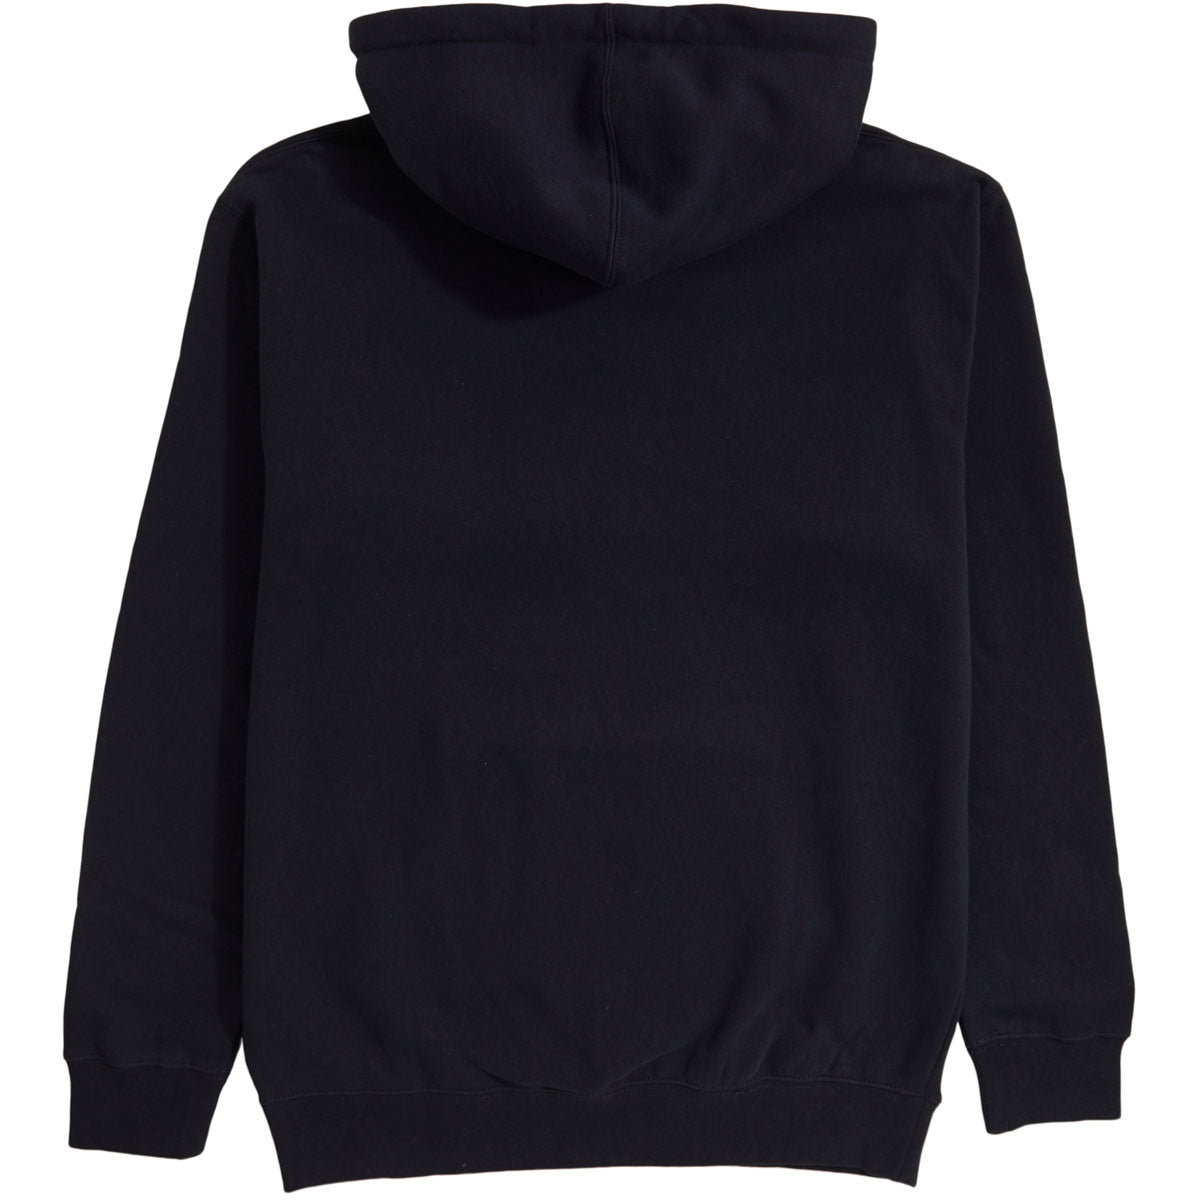 CCS Staple Pullover Hoodie - Navy image 4